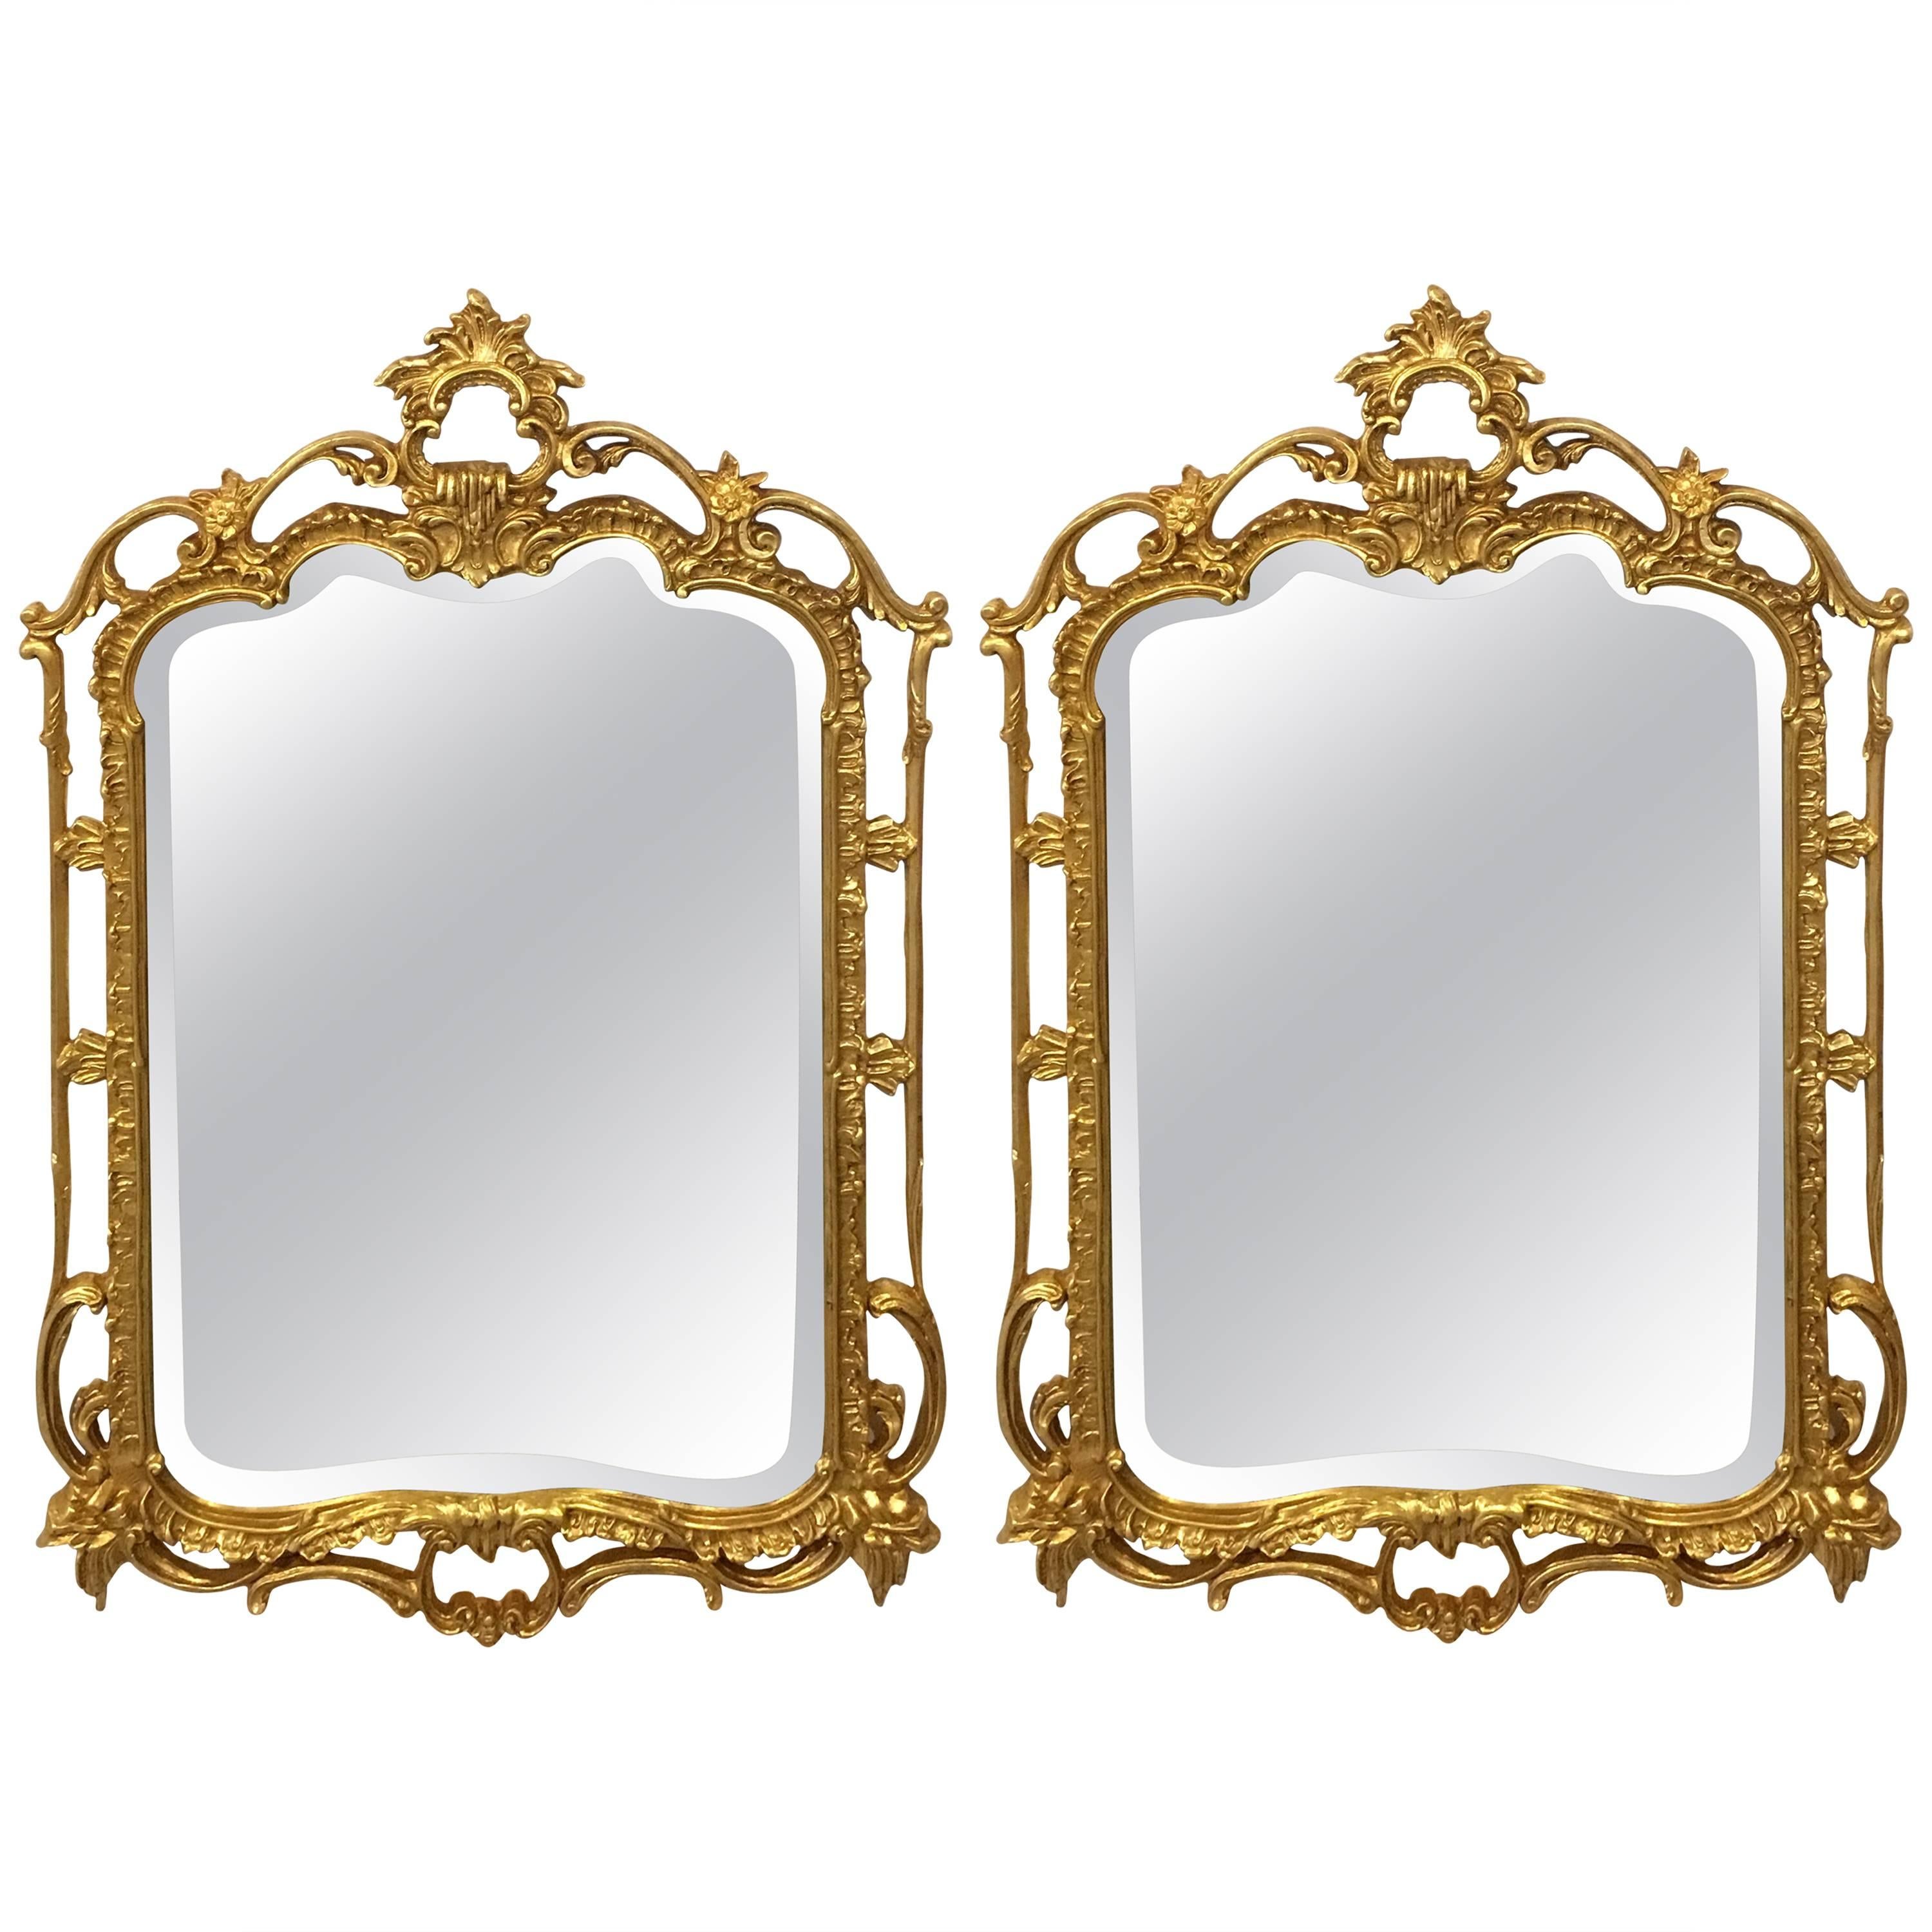 Pair of Giltwood Chippendale Styled Mirrors by Friedman Bros